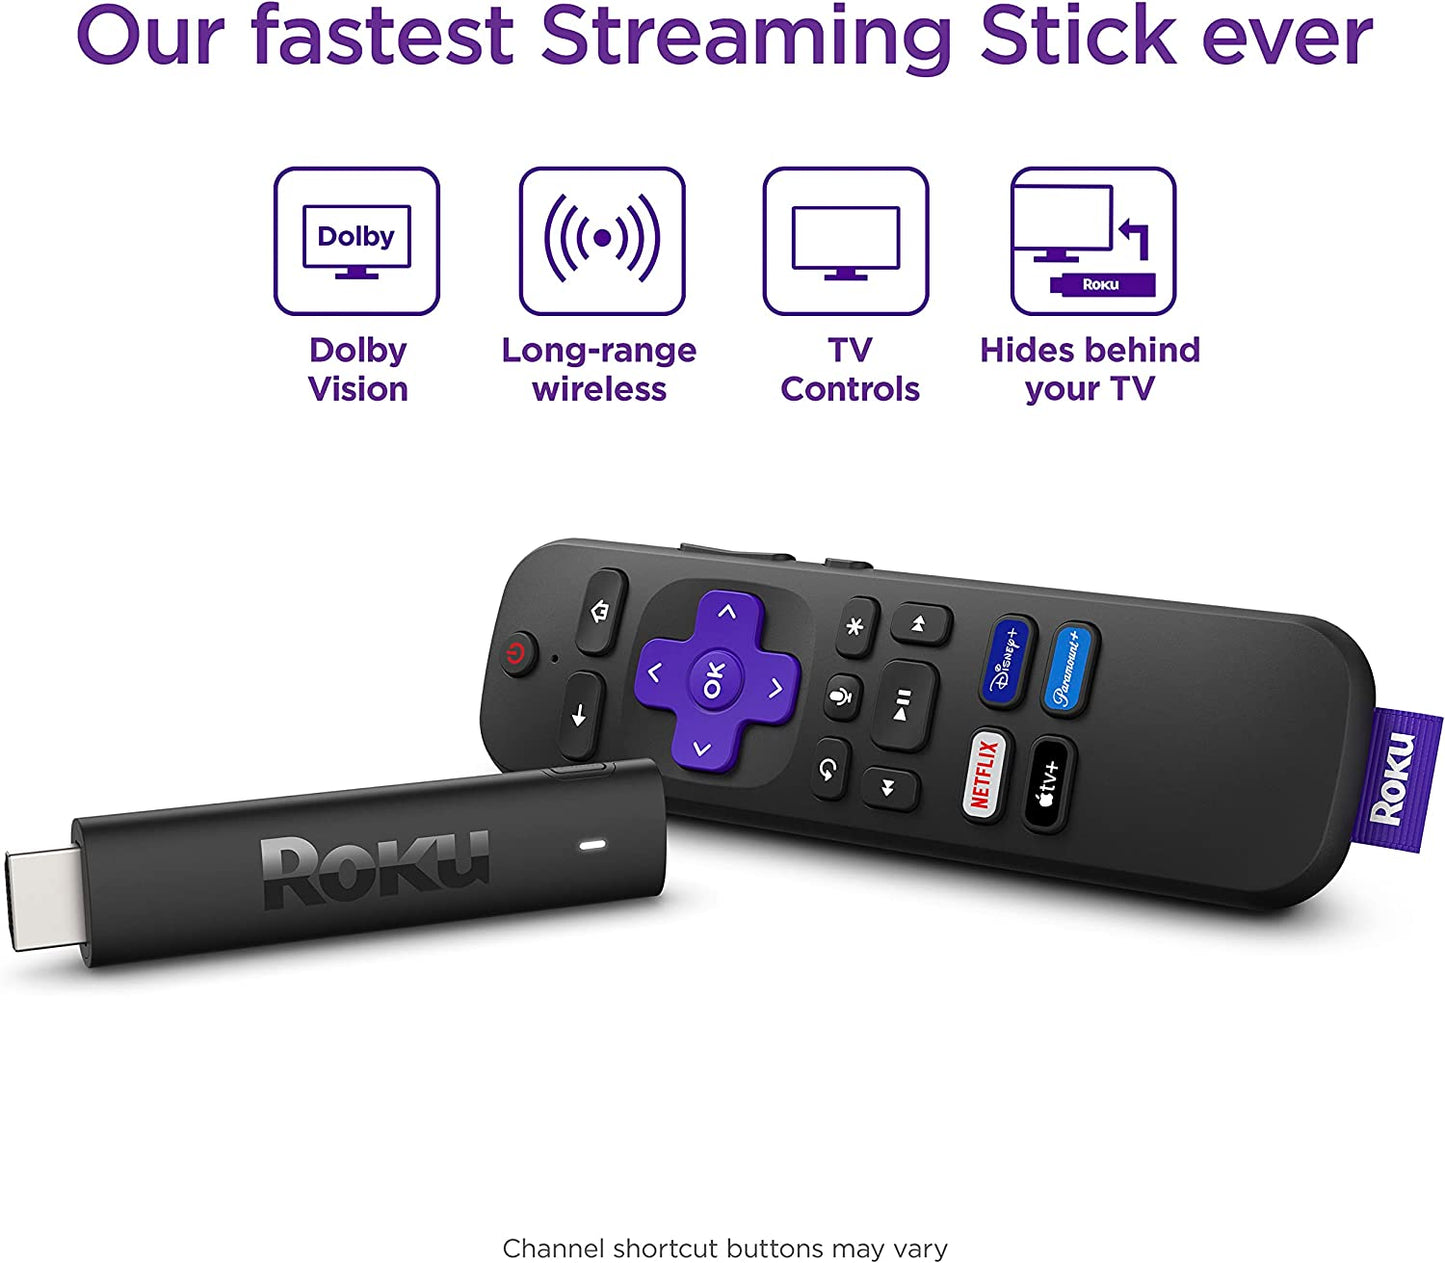 Roku Streaming Stick 4K | Streaming Device 4K/HDR/Dolby Vision with Roku Voice Remote and TV Controls